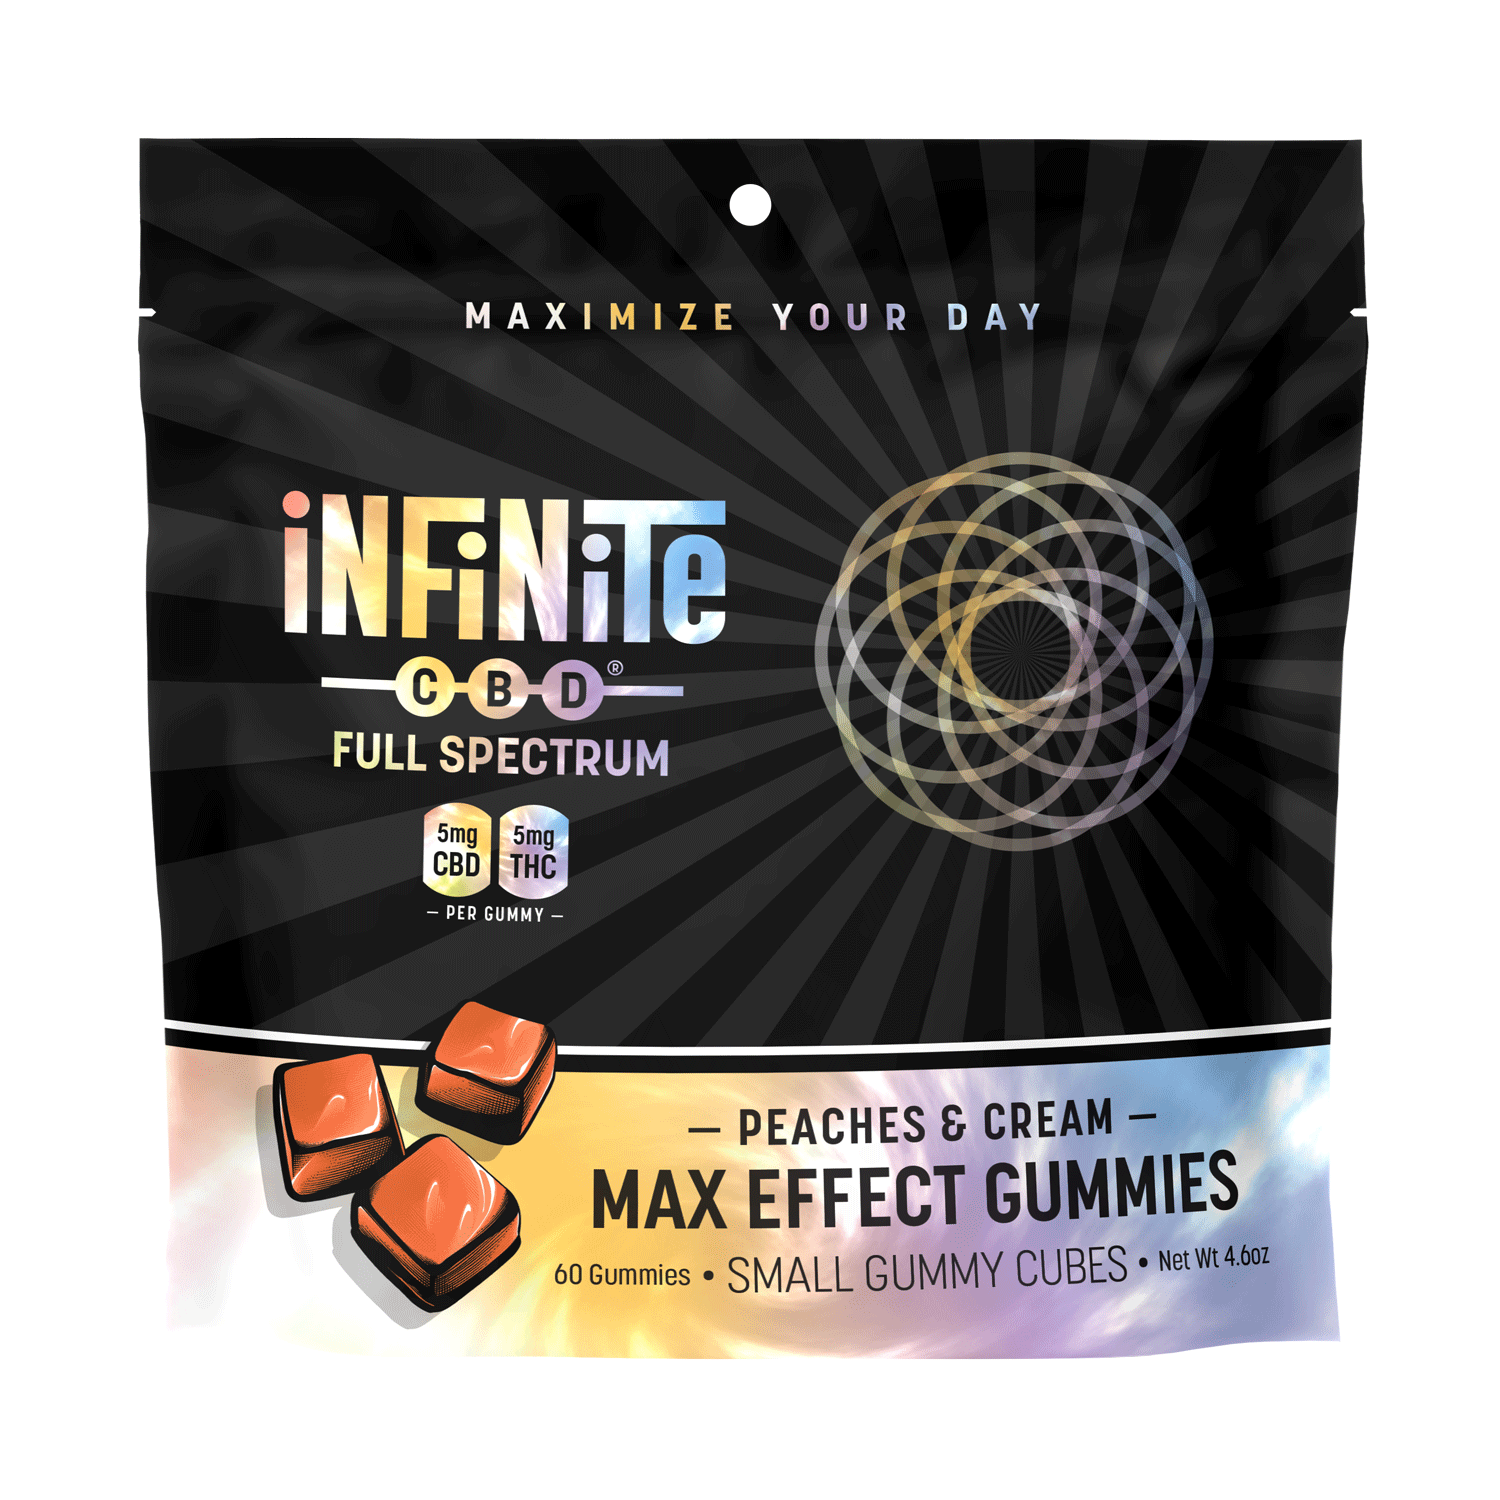 5mg Max Effect Cubes (contains D9 THC)